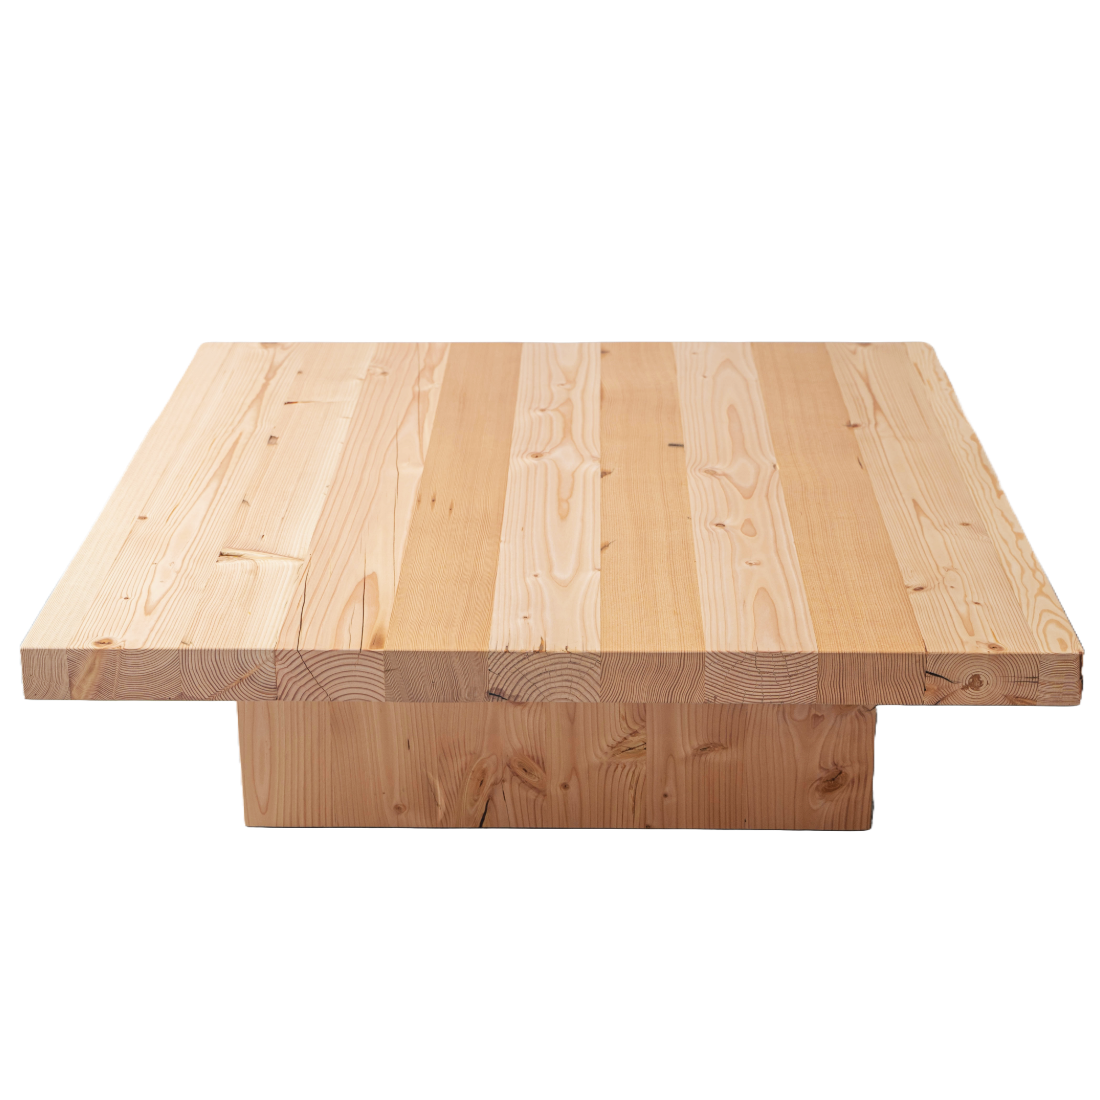 timber coffee table for sale - buy online